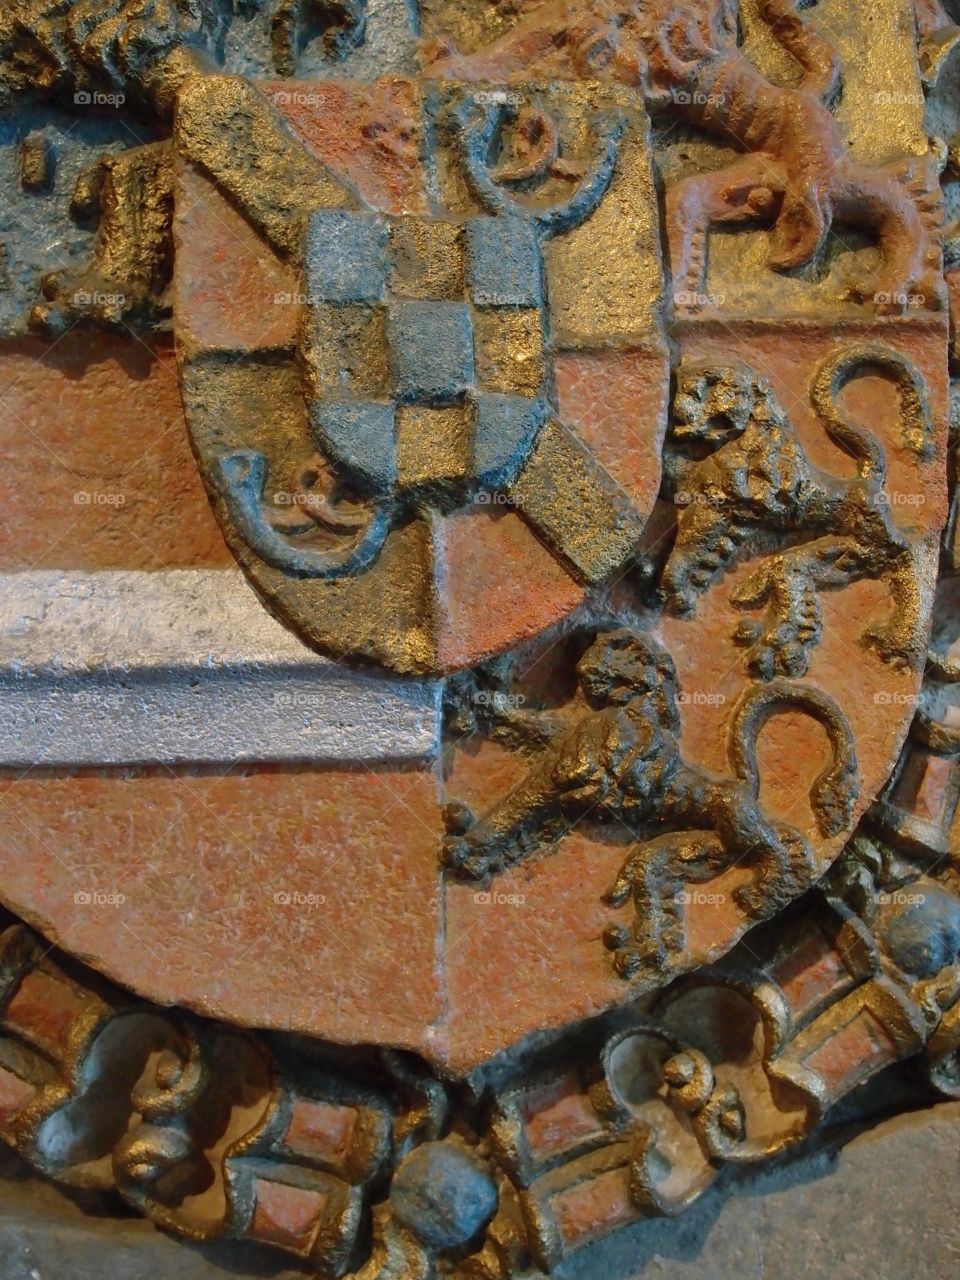 A decorative family crest with decorative lions and a patterned shield in the Chateau dé Vianden in Northern Luxembourg. 